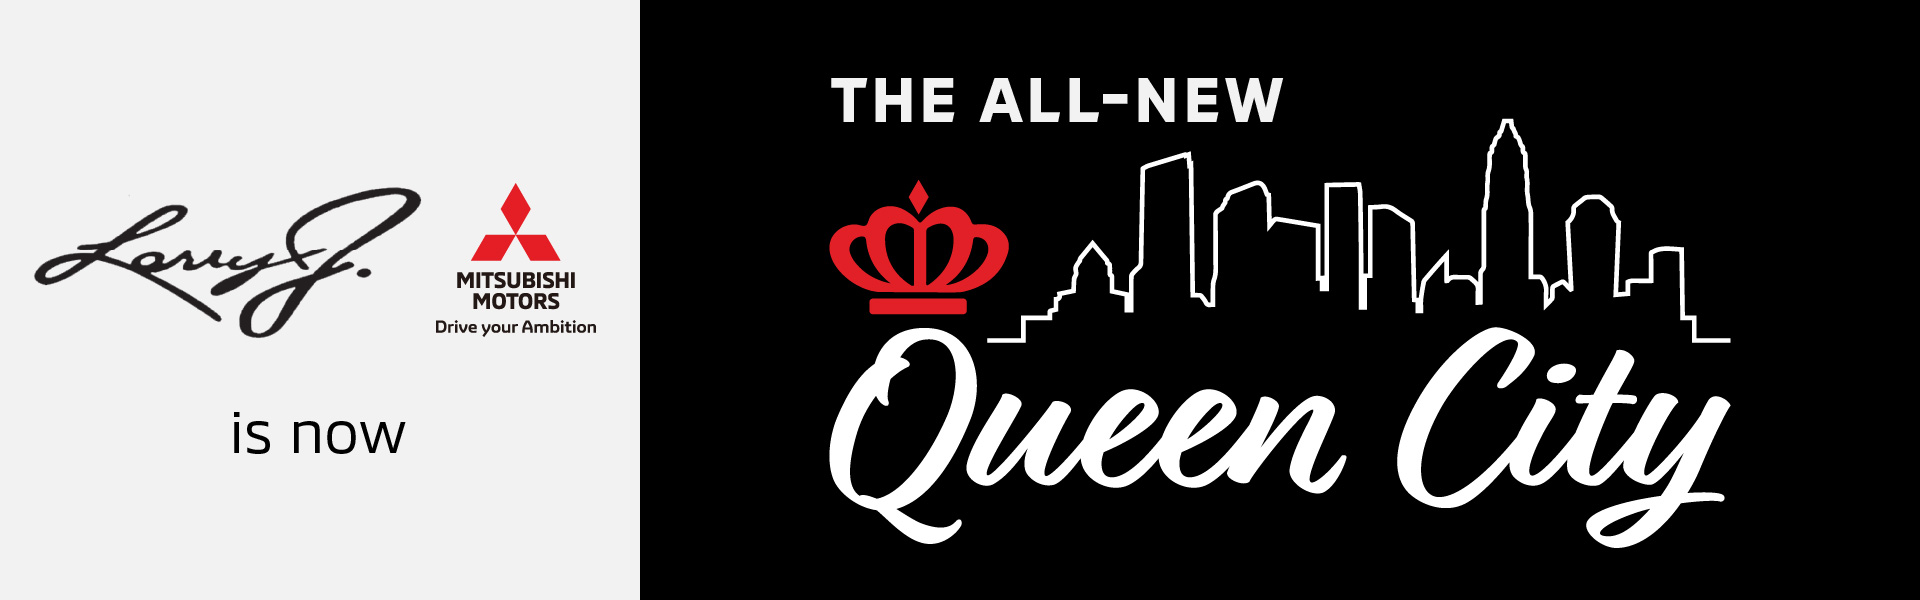 The all -new Queen city